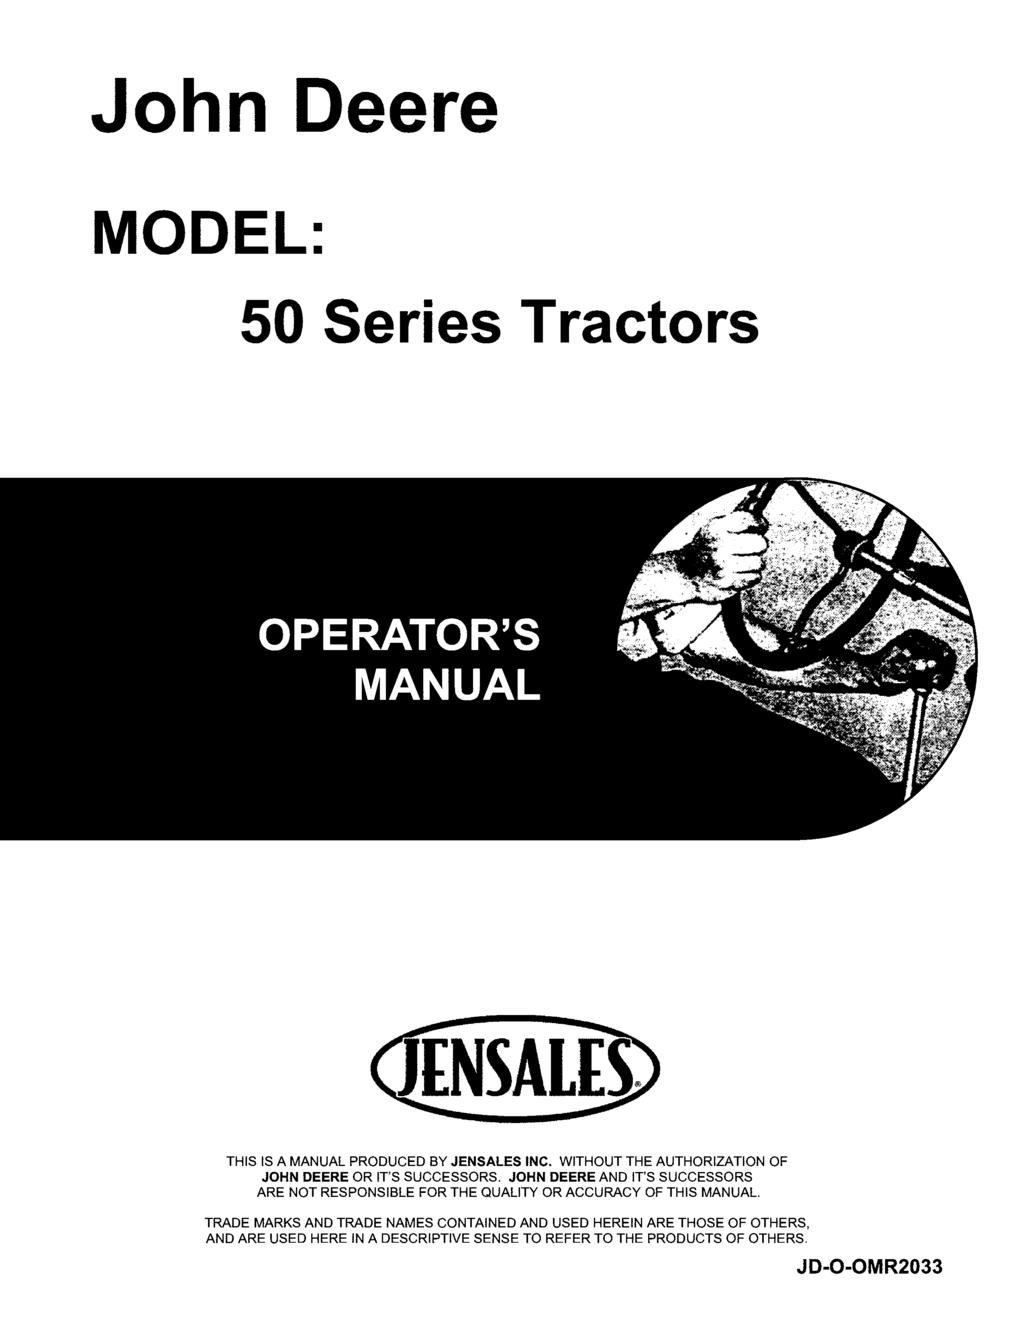 John Deere MODEL: 50 Series Tractors THIS IS A MANUAL PRODUCED BY JENSALES INC. WITHOUT THE AUTHORIZATION OF JOHN DEERE OR IT'S SUCCESSORS.